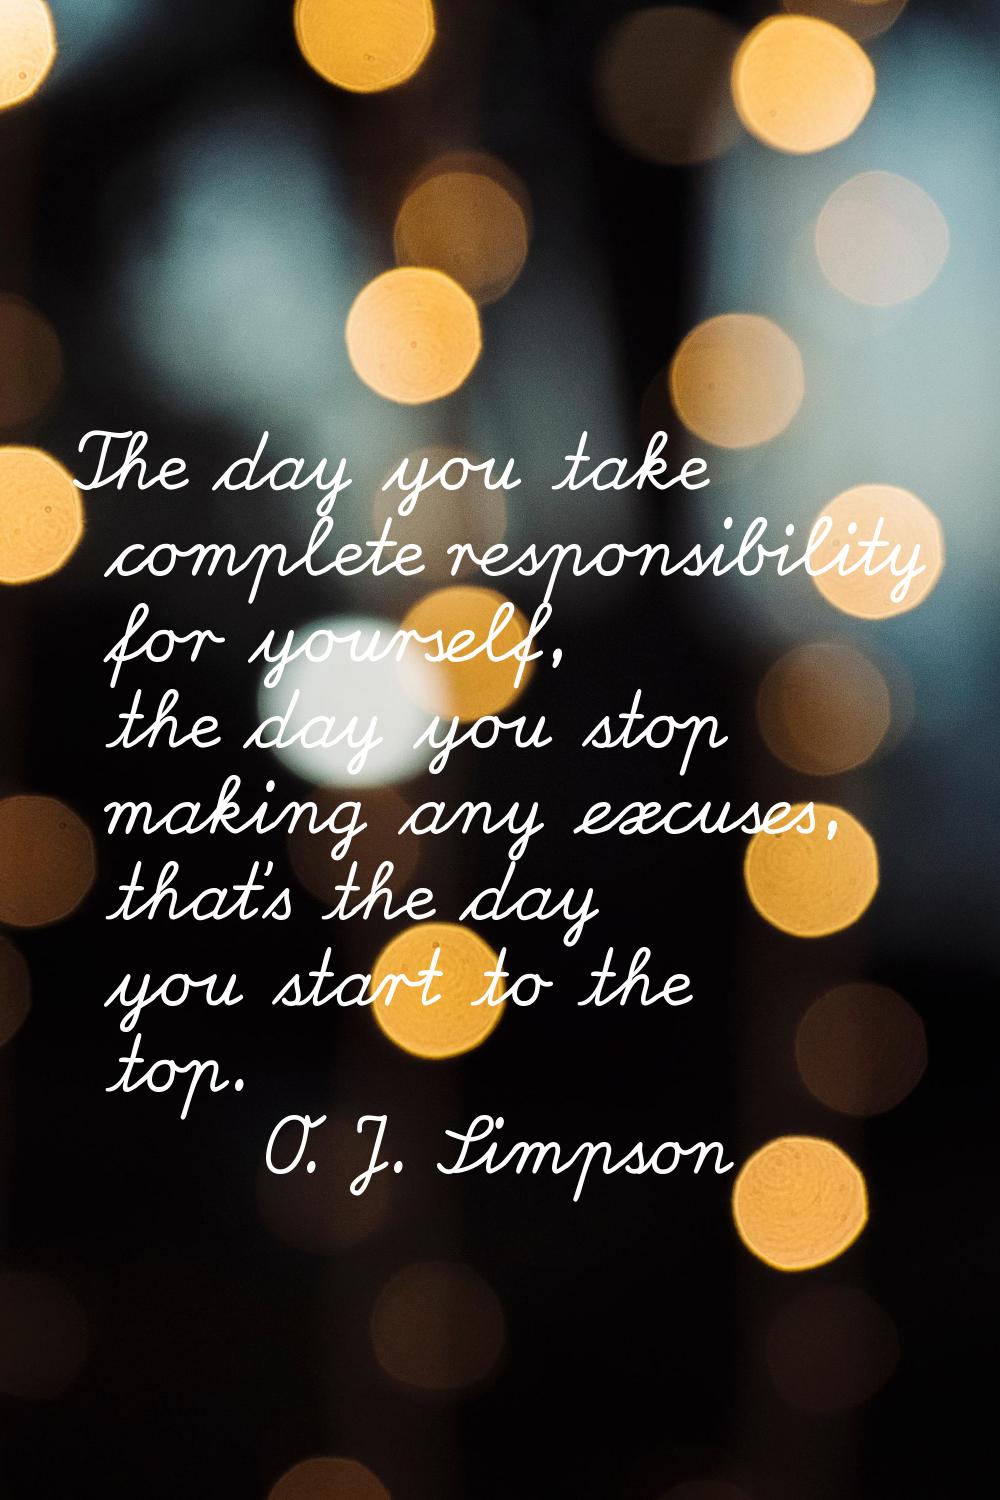 The day you take complete responsibility for yourself, the day you stop making any excuses, that's 